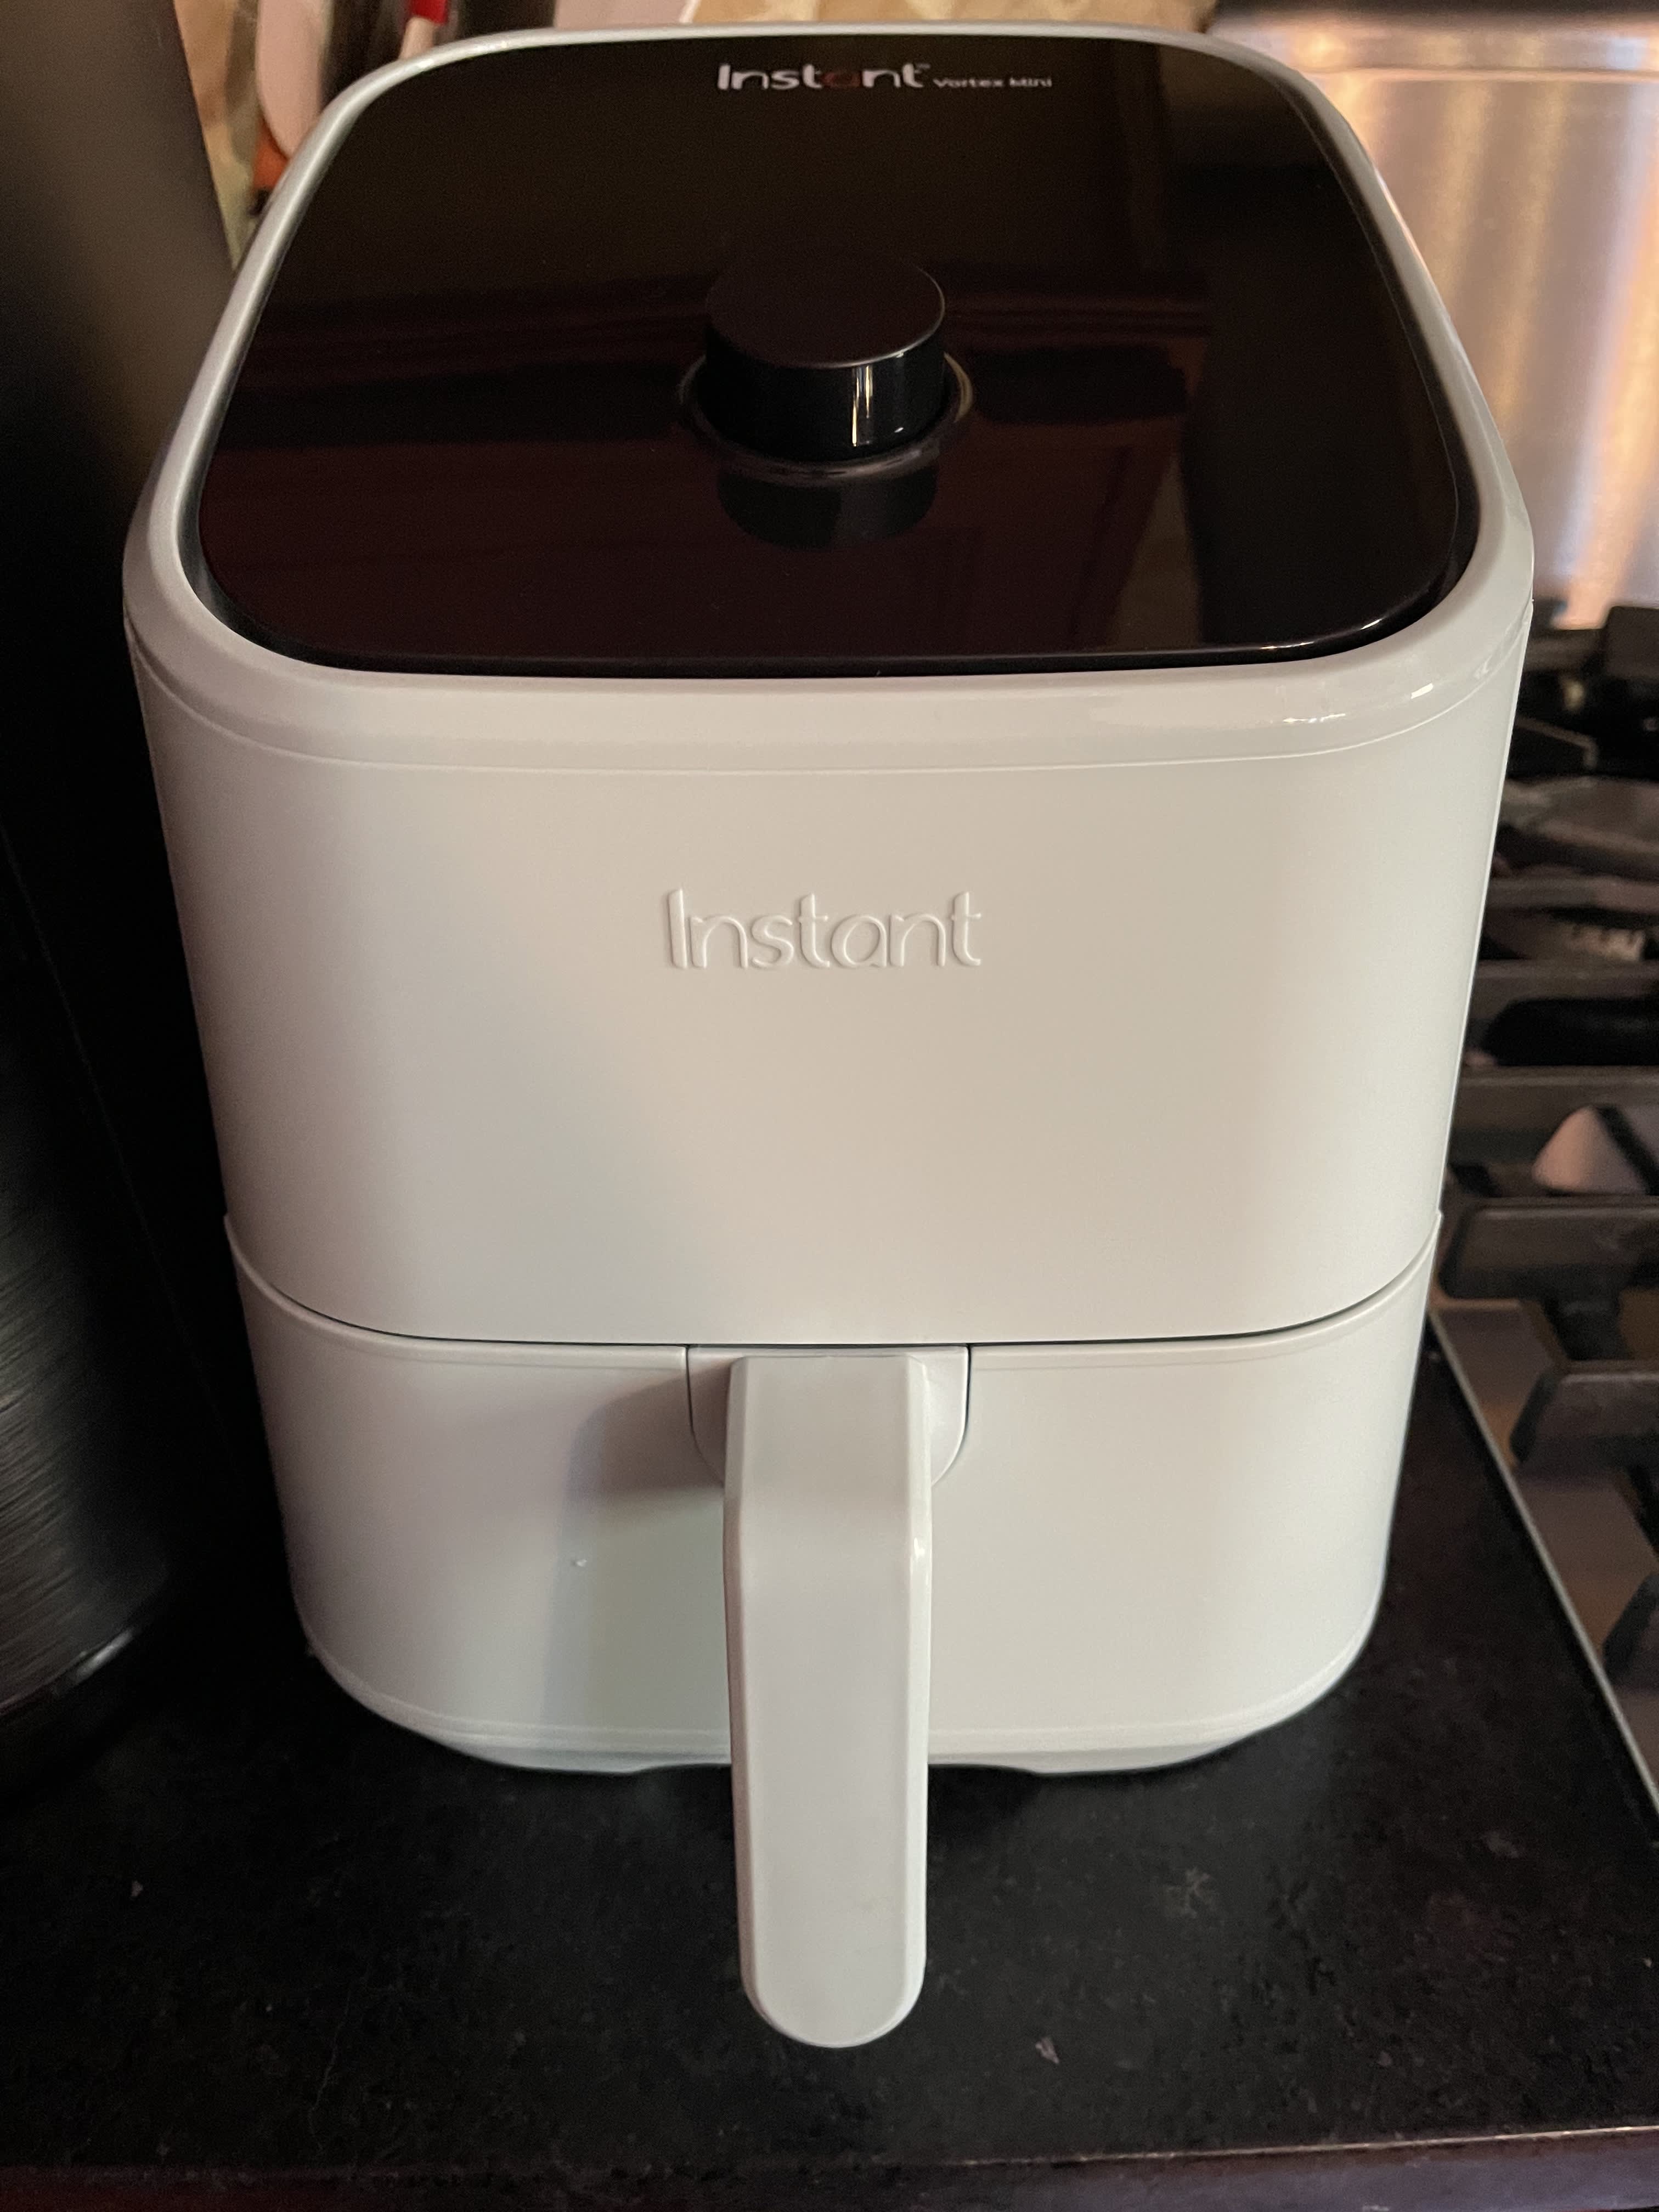 This Instant Pot Air Fryer With 13,000 Five-Star Ratings Makes